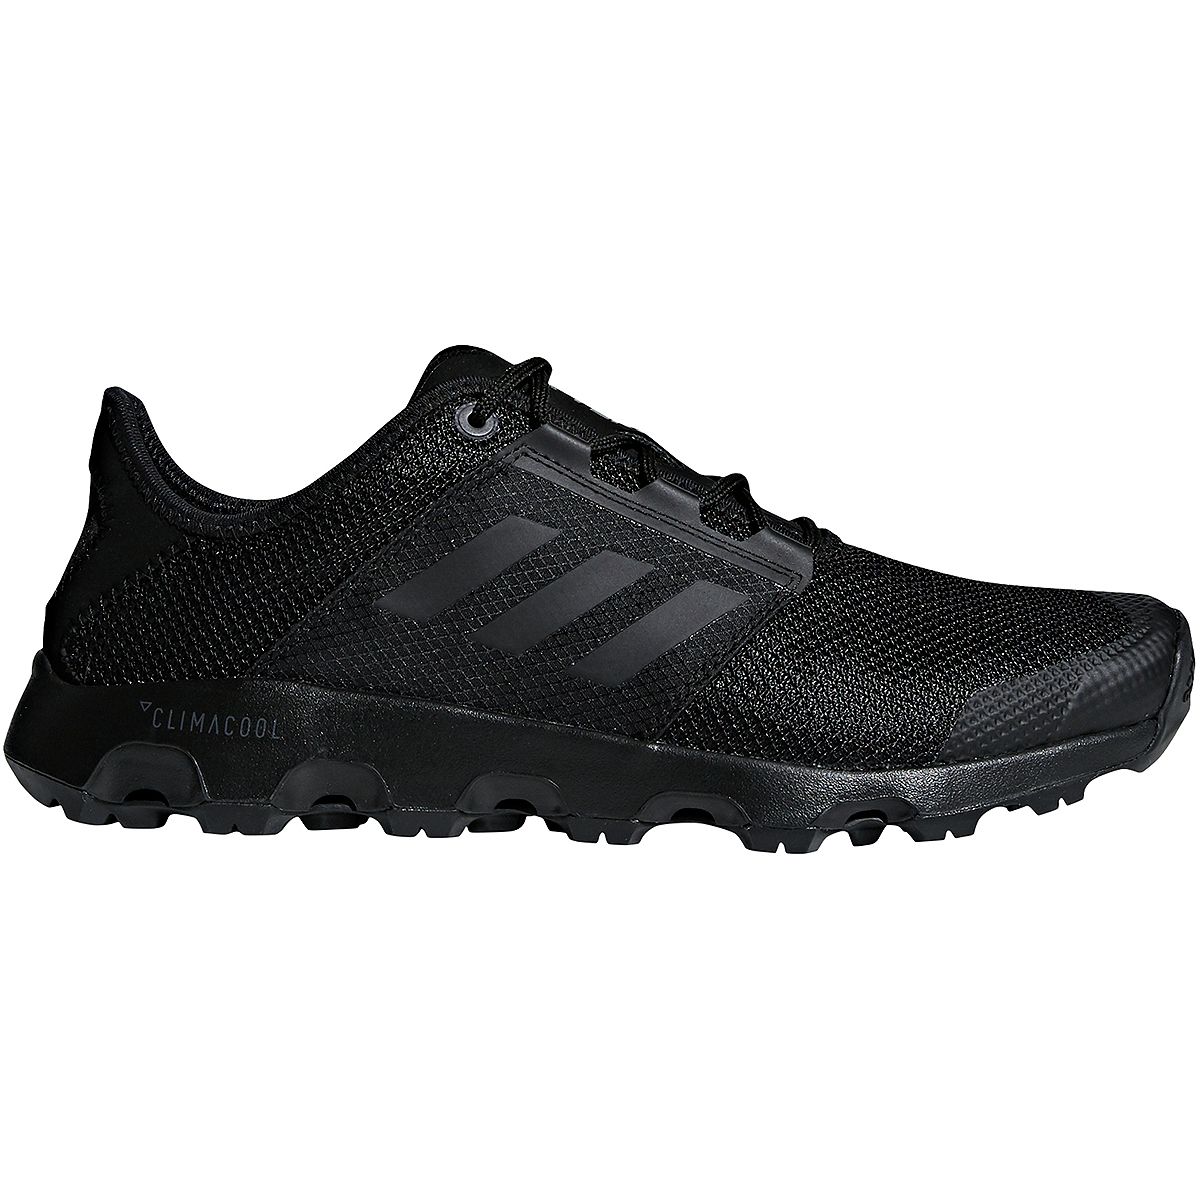 Adidas Outdoor Climacool Voyager Shoe Mens ADA004D CAR S9